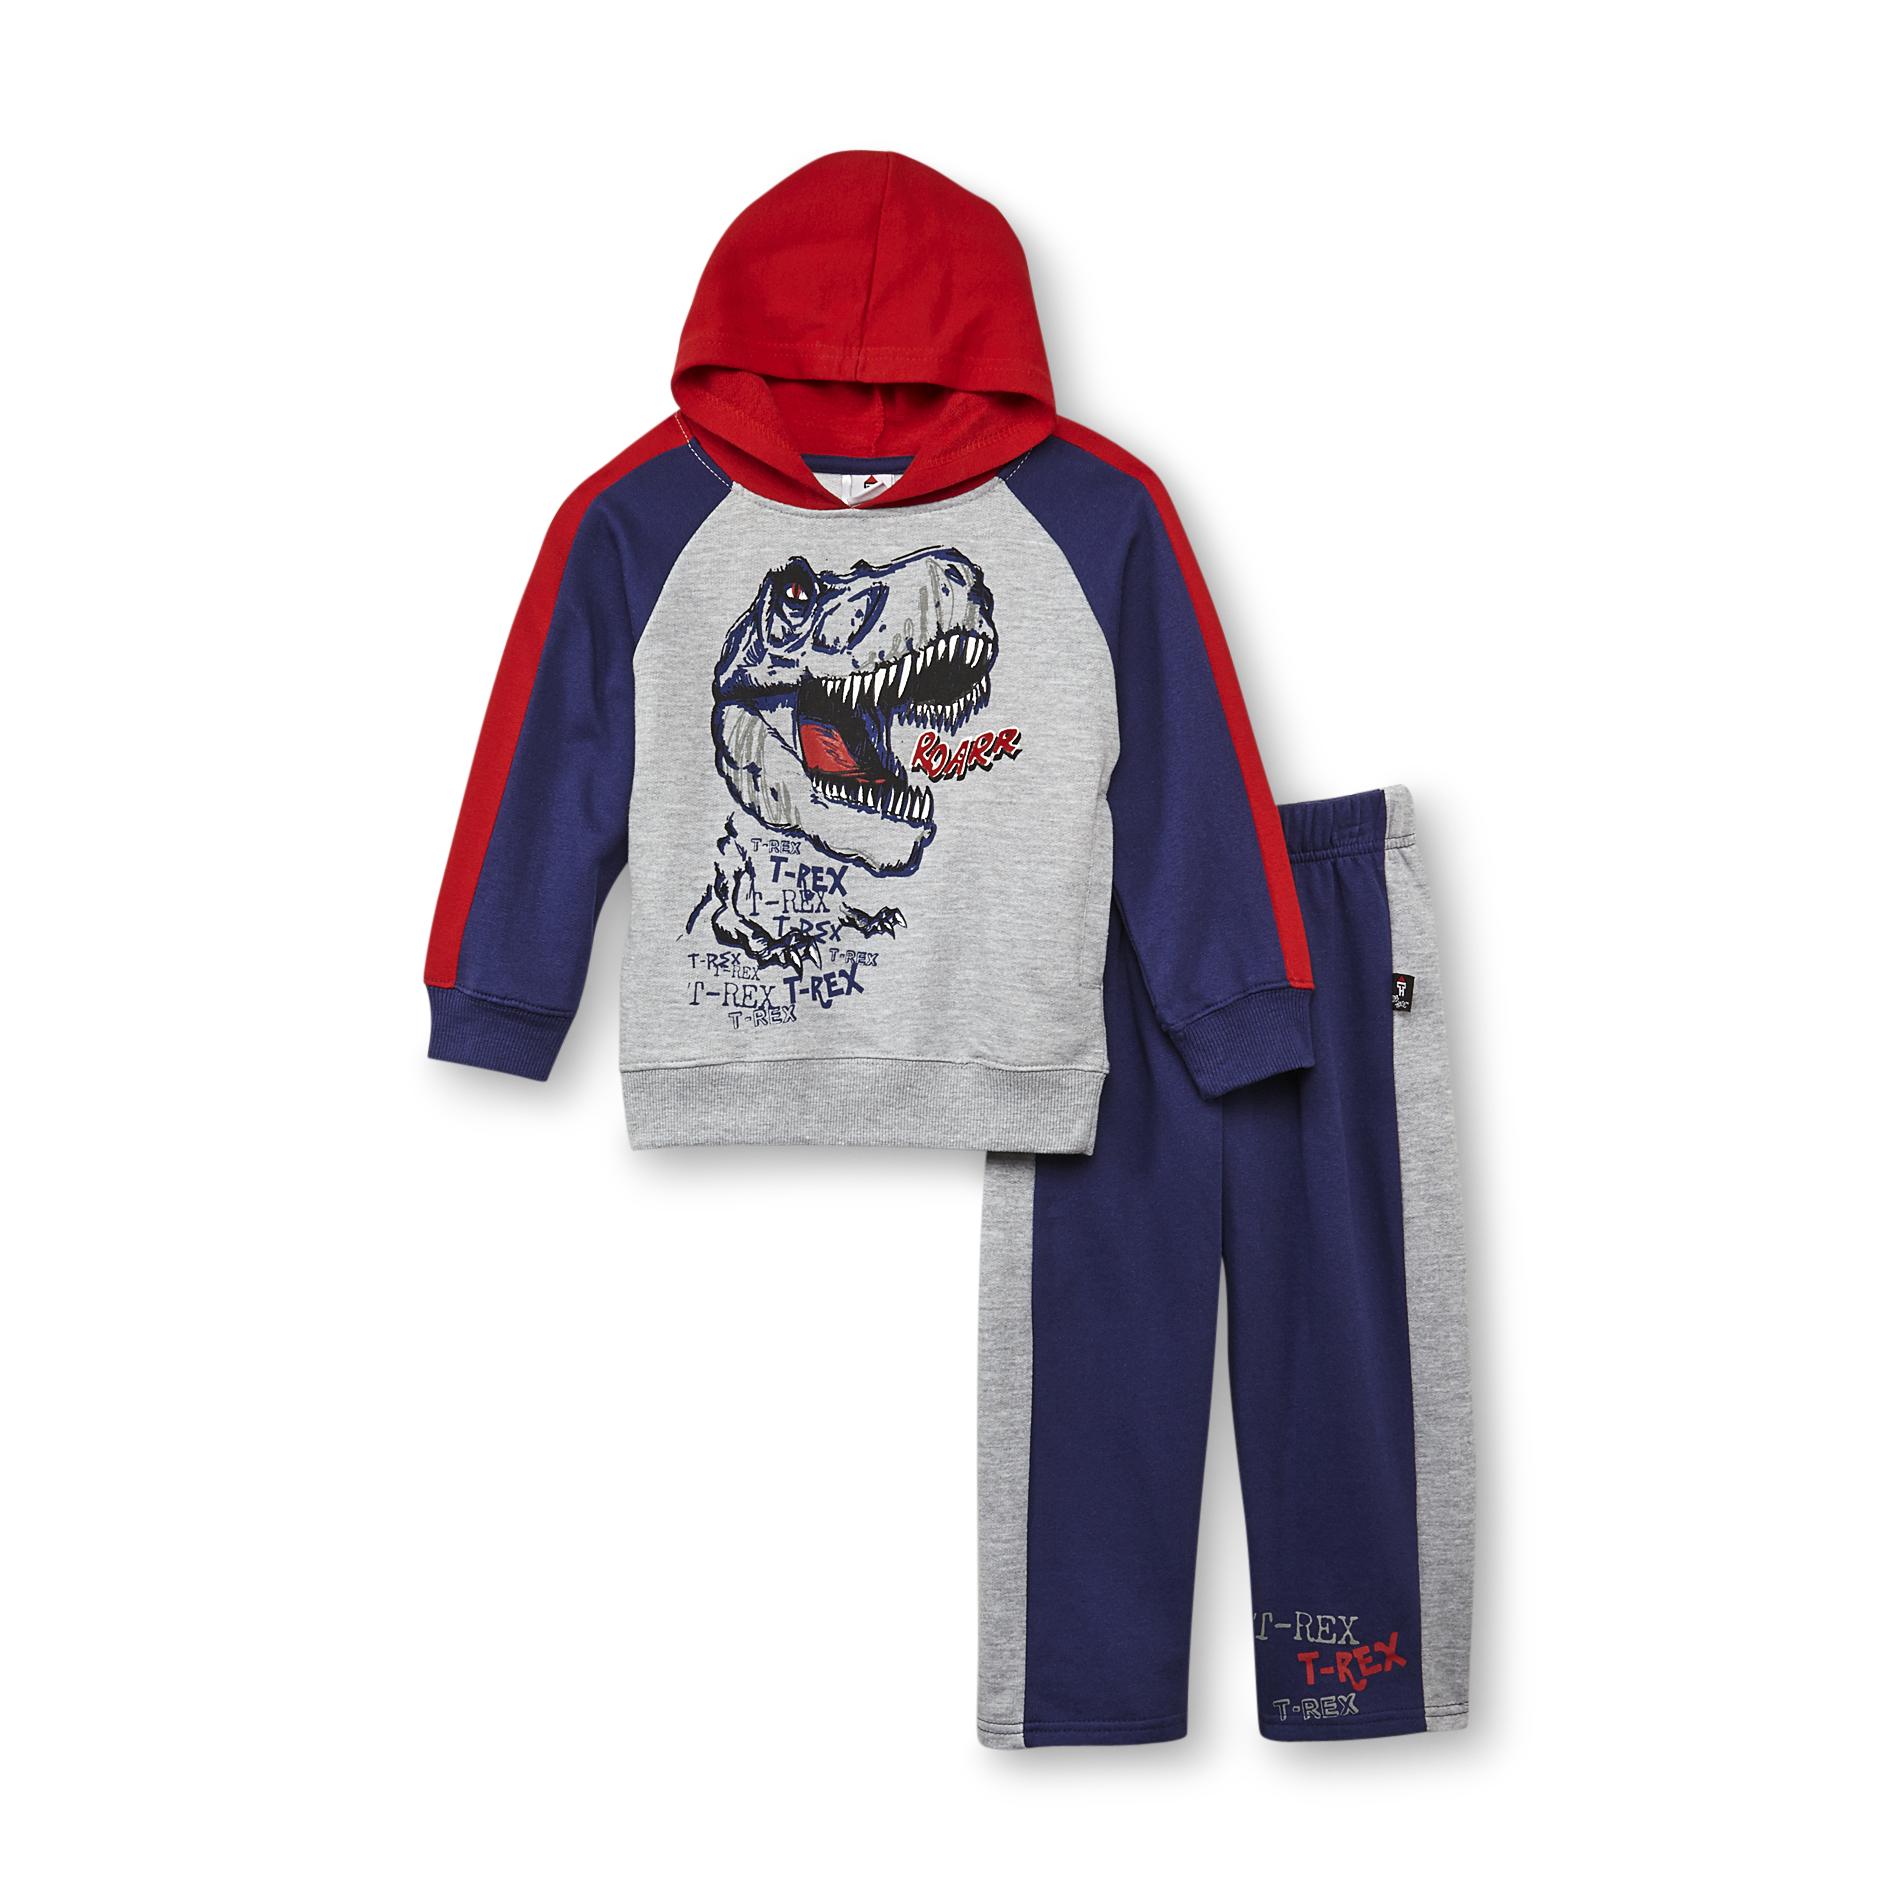 Clubhouse Collection Boy's Fleece Hoodie & Pants - T. Rex